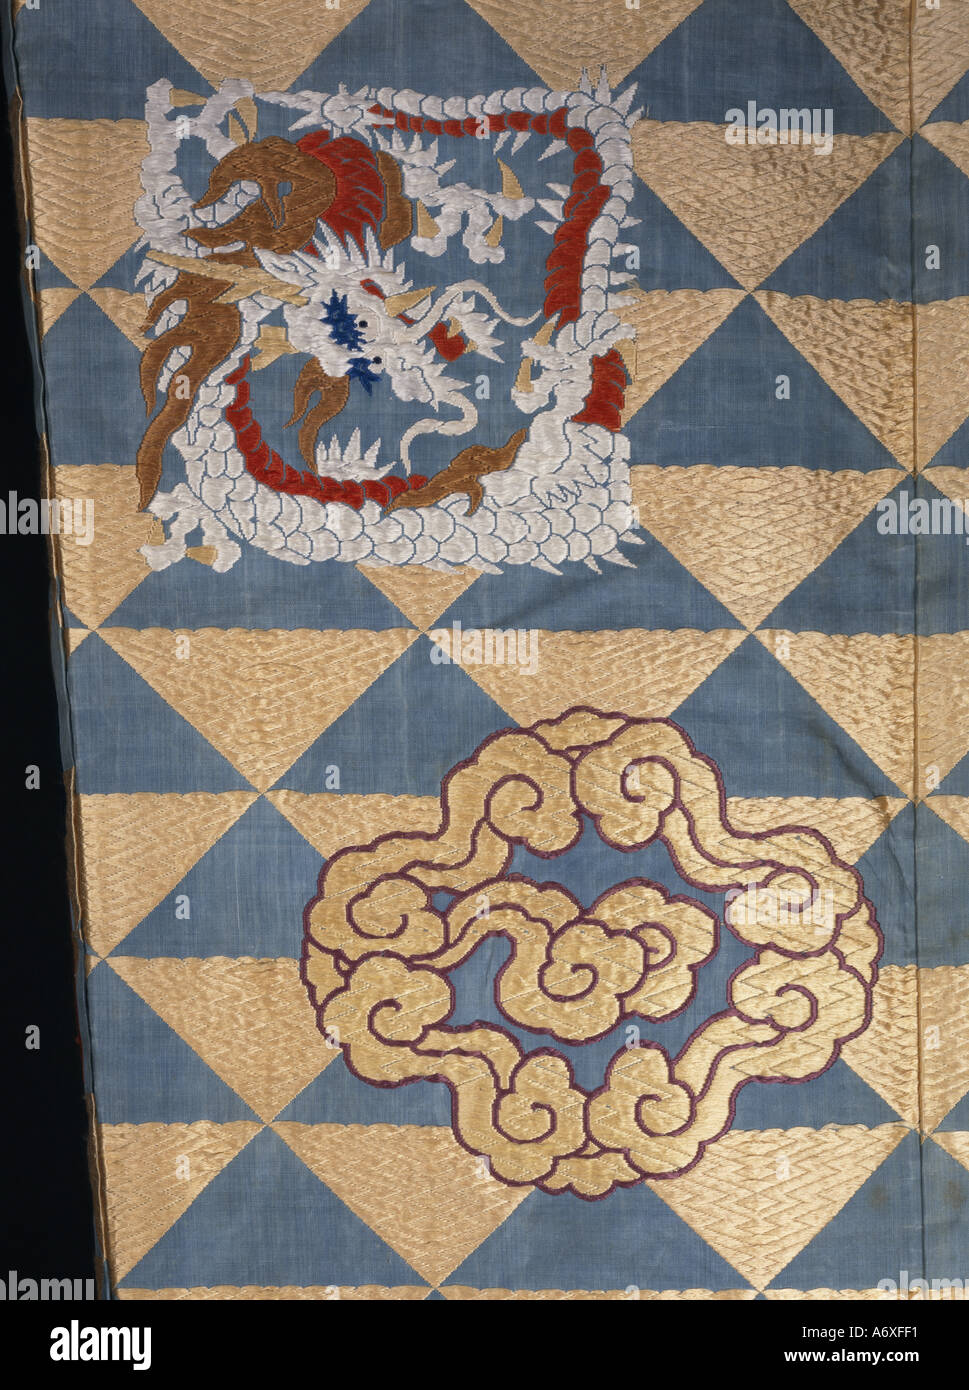 Dragons, Clouds. Japan, 18th century. Stock Photo